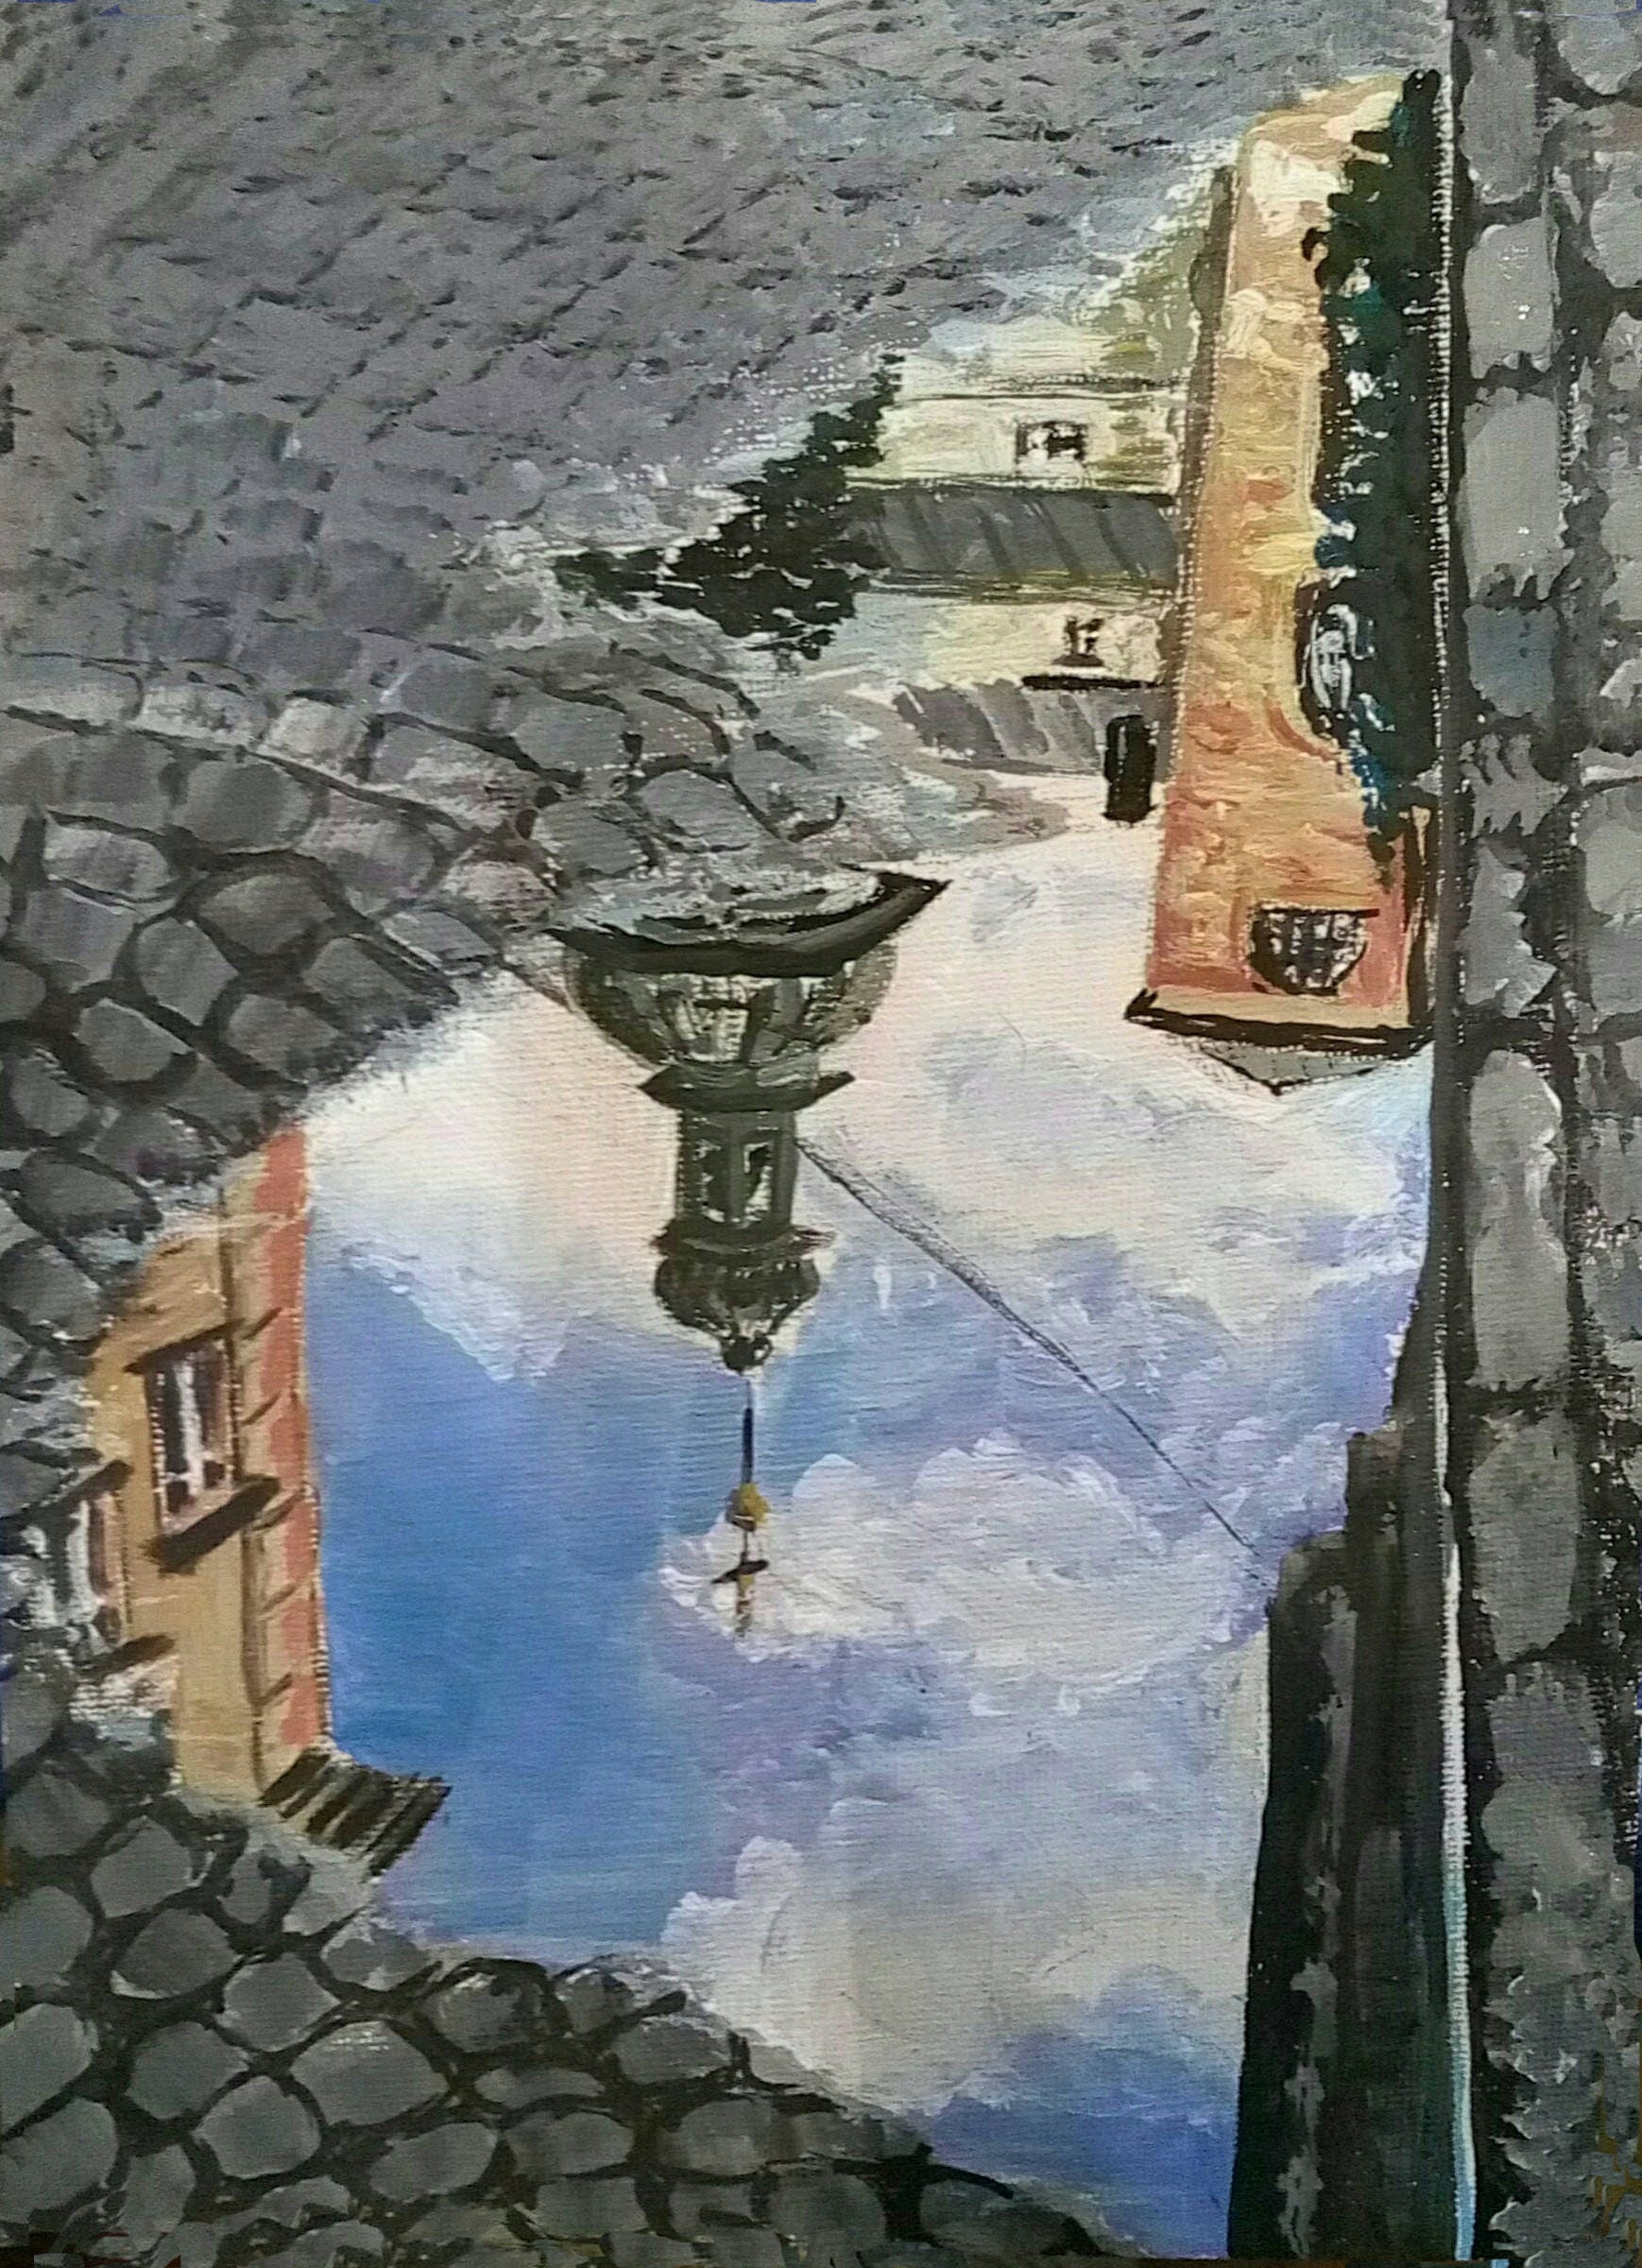 Spring puddle Reflection picture Original acrylic Painting